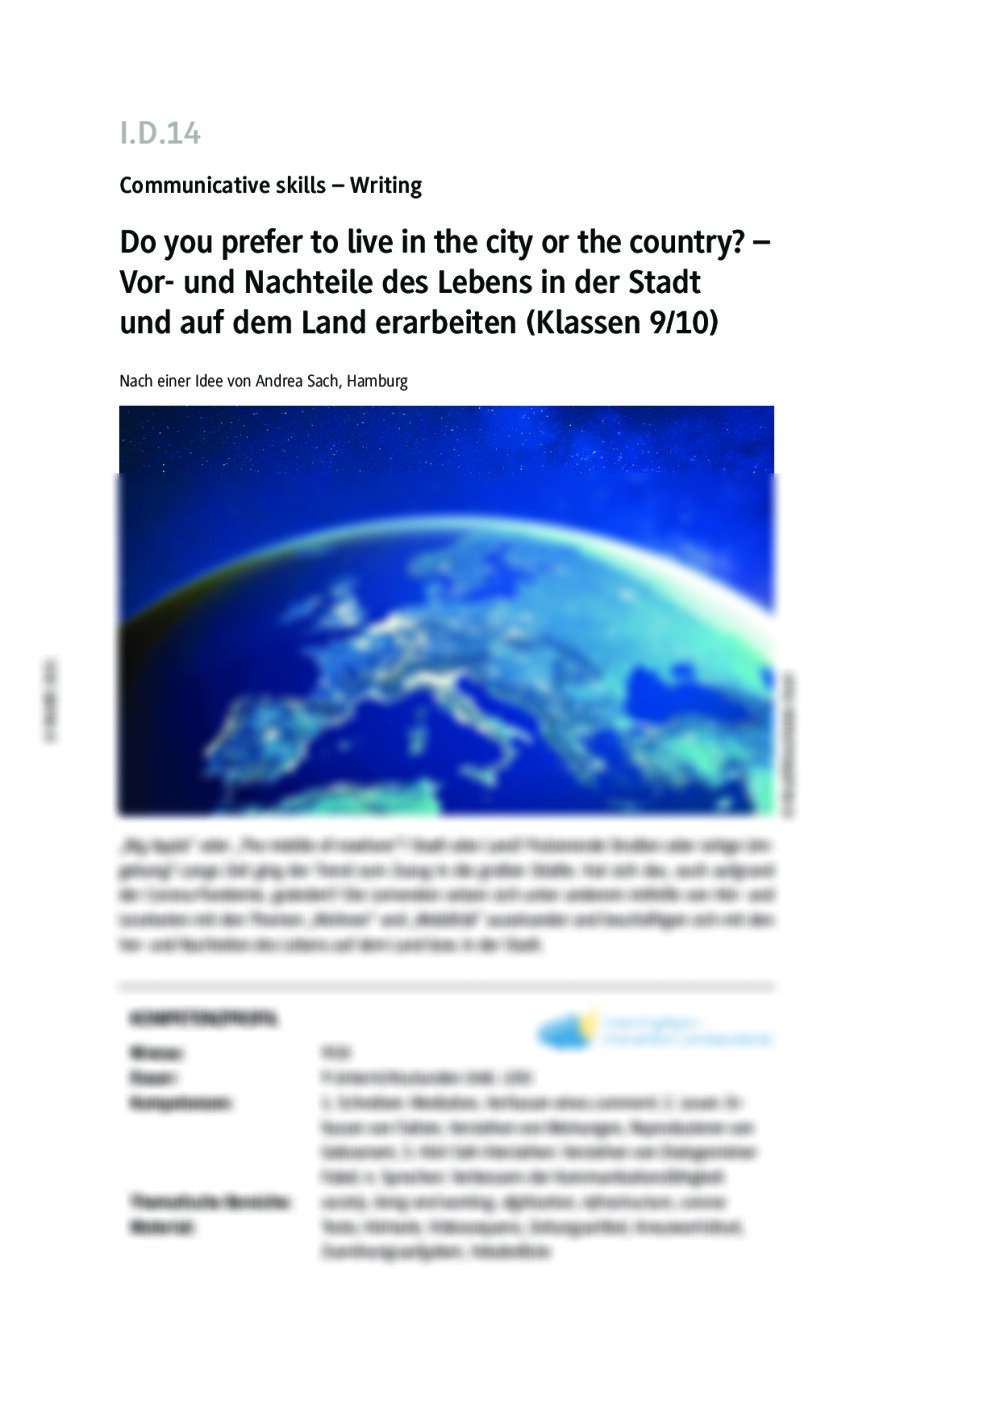 Do you prefer to live in the city or the country? - Seite 1